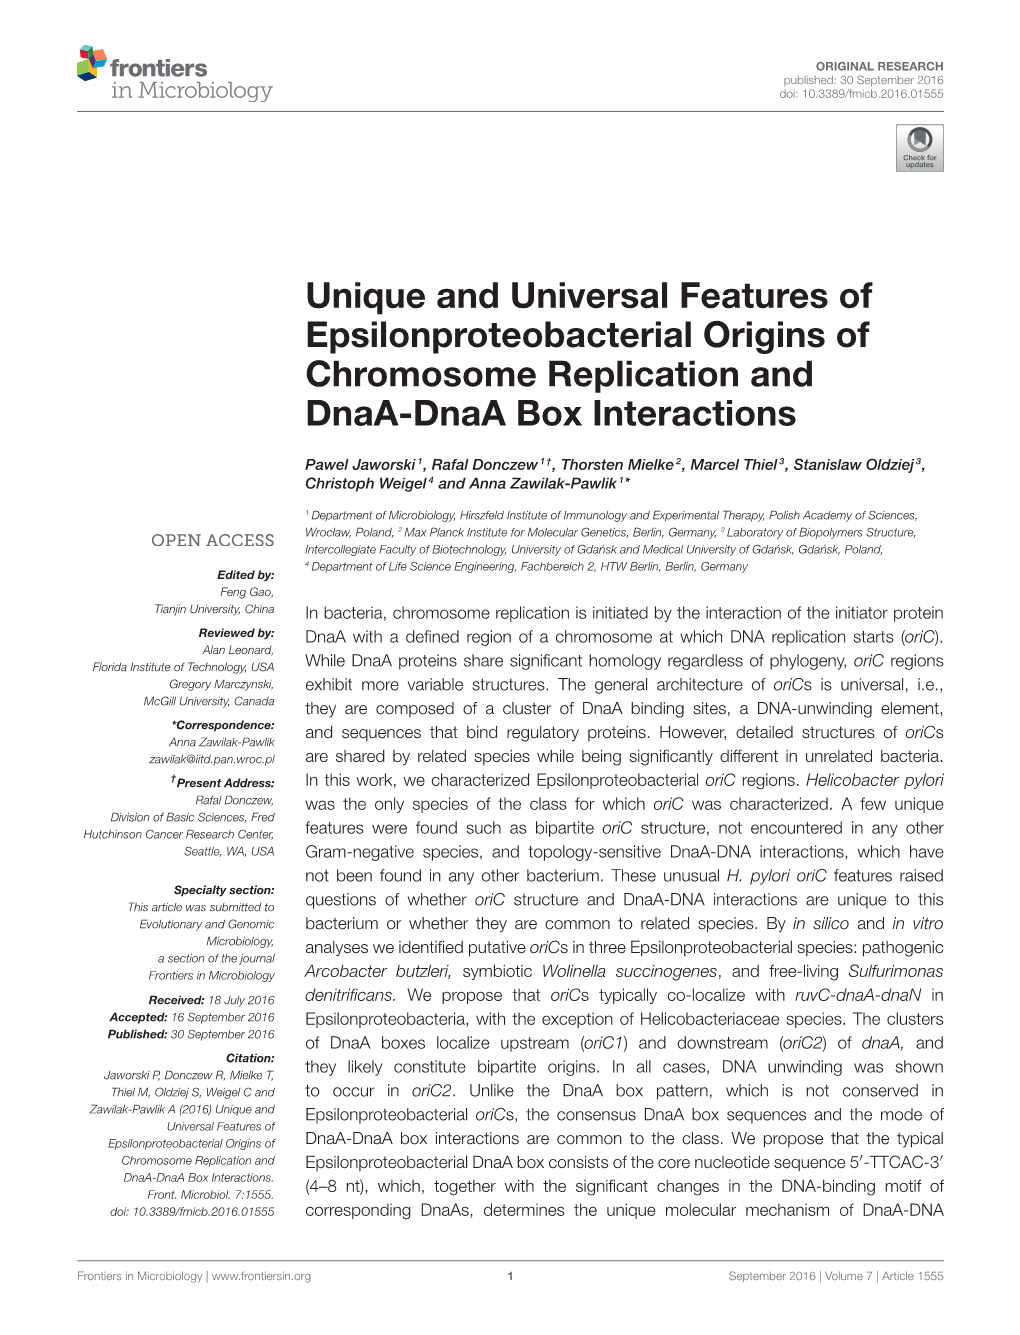 Unique and Universal Features of Epsilonproteobacterial Origins of Chromosome Replication and Dnaa-Dnaa Box Interactions